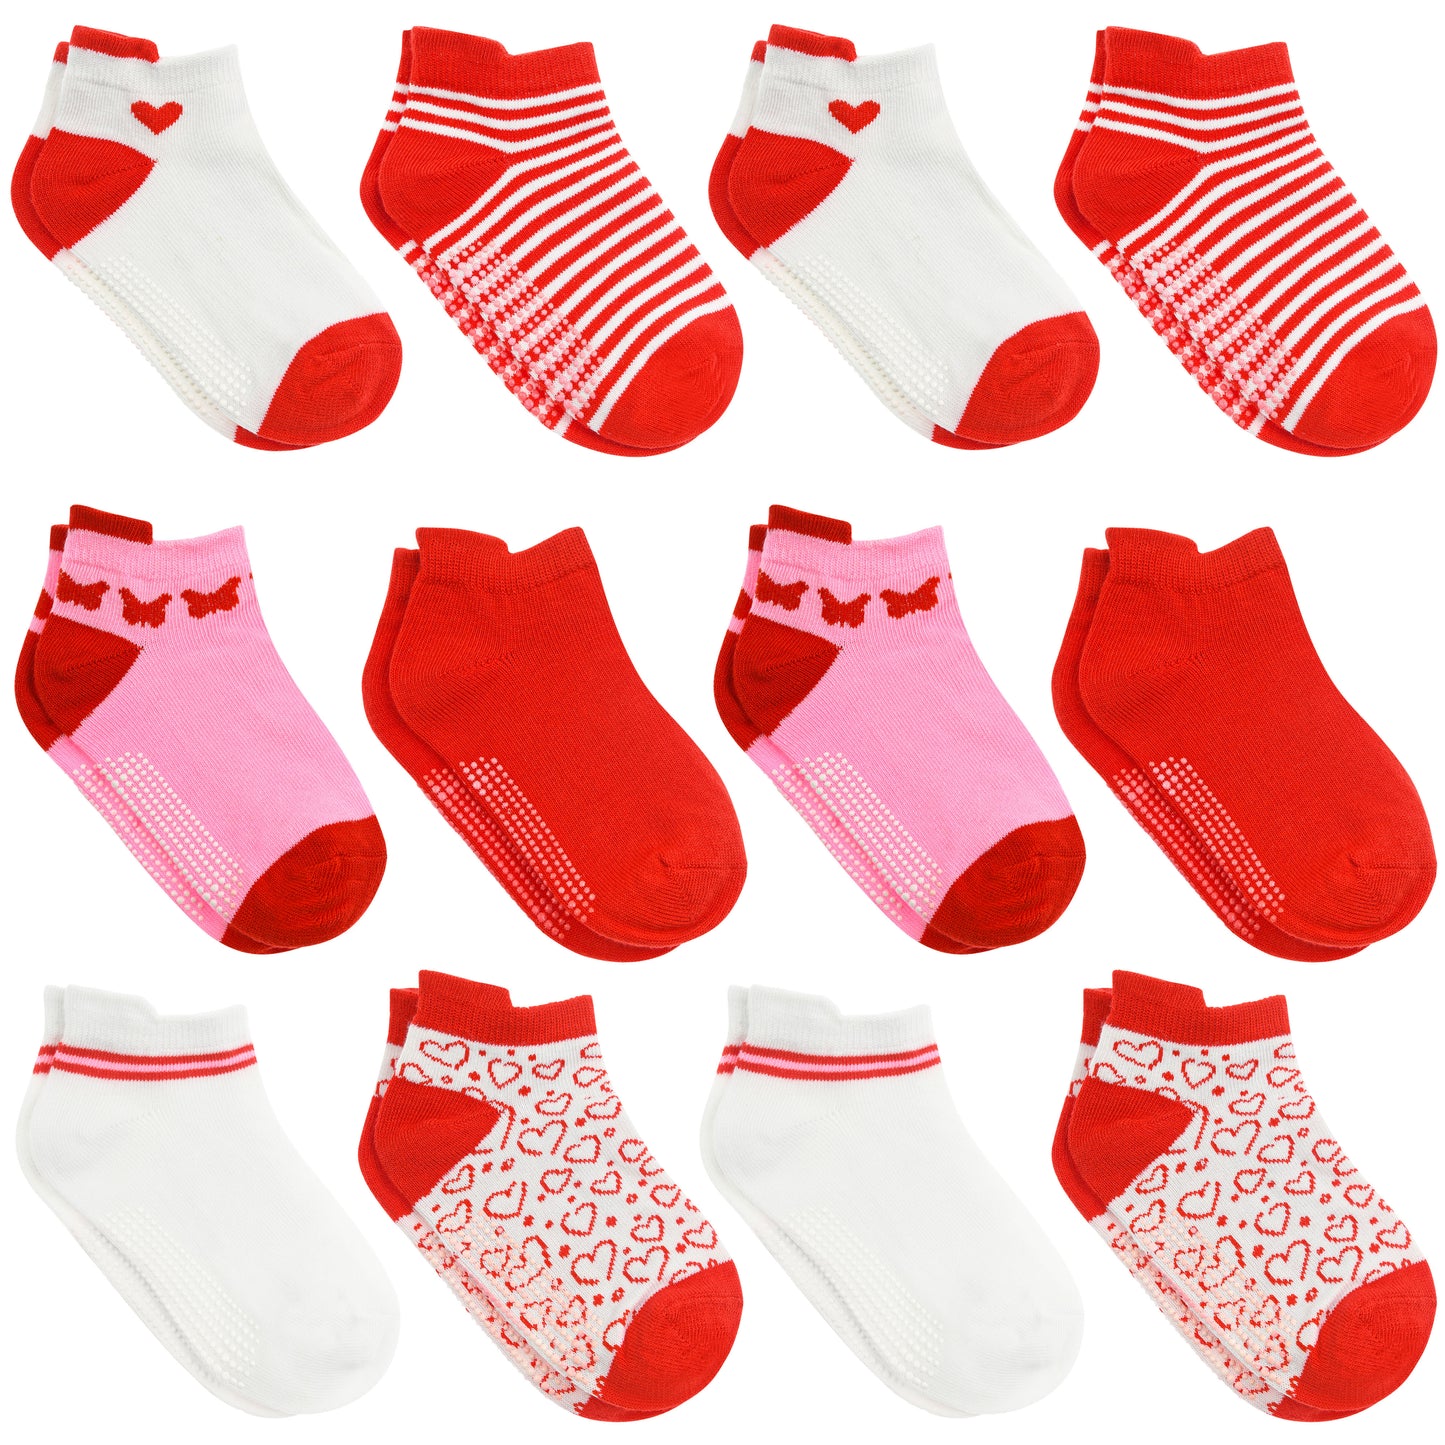 Baby and Toddler Ankle Socks- 12 Pairs